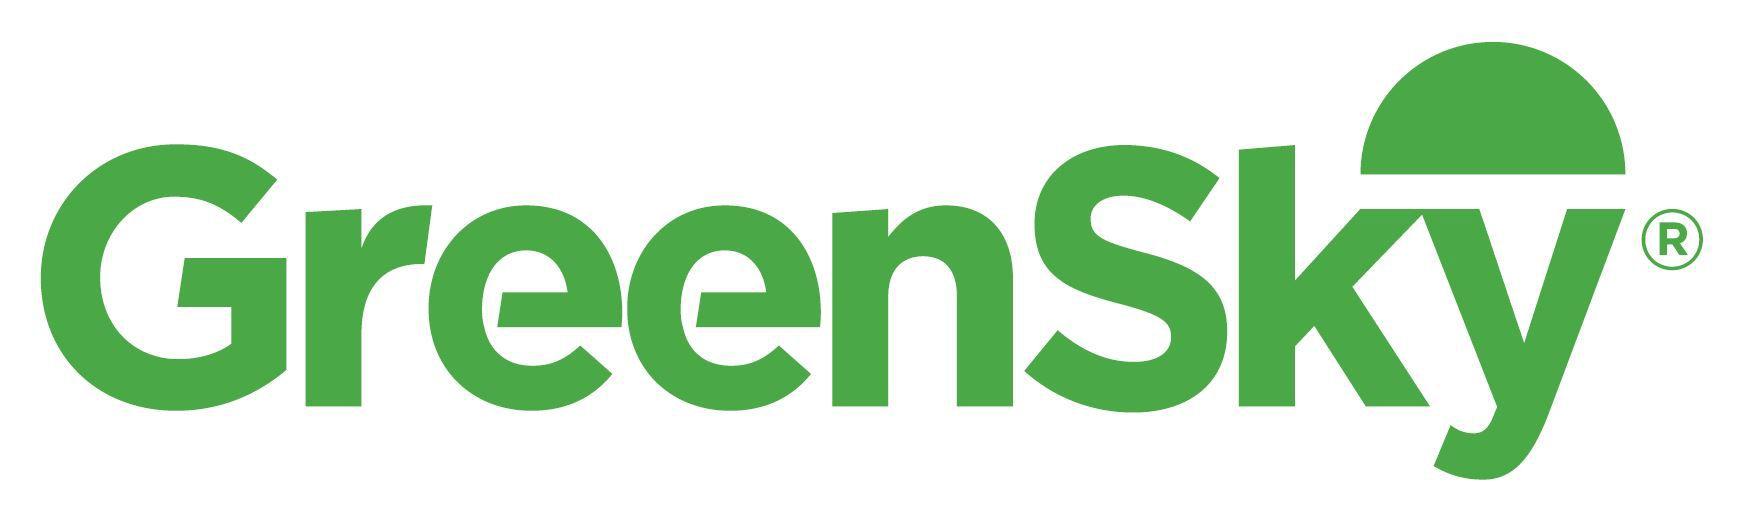 Green Payment Business Logo - American Express and GreenSky Team Up to Fuel Business Growth